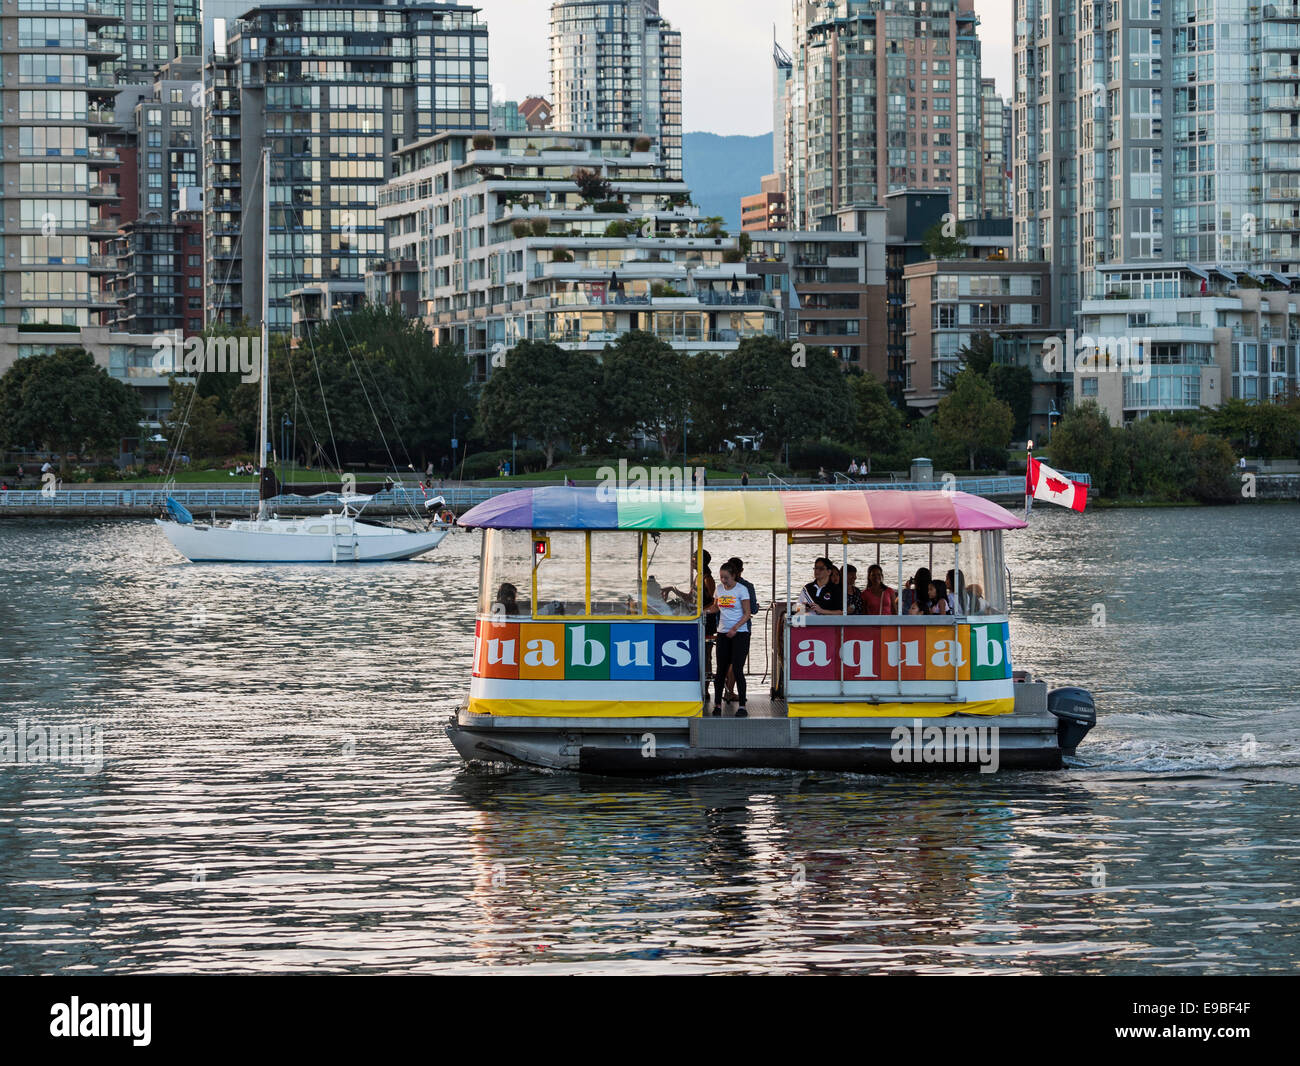 An Aquabus ferry boat transports passengers on False Creek's waterway, Vancouver, Canada Stock Photo